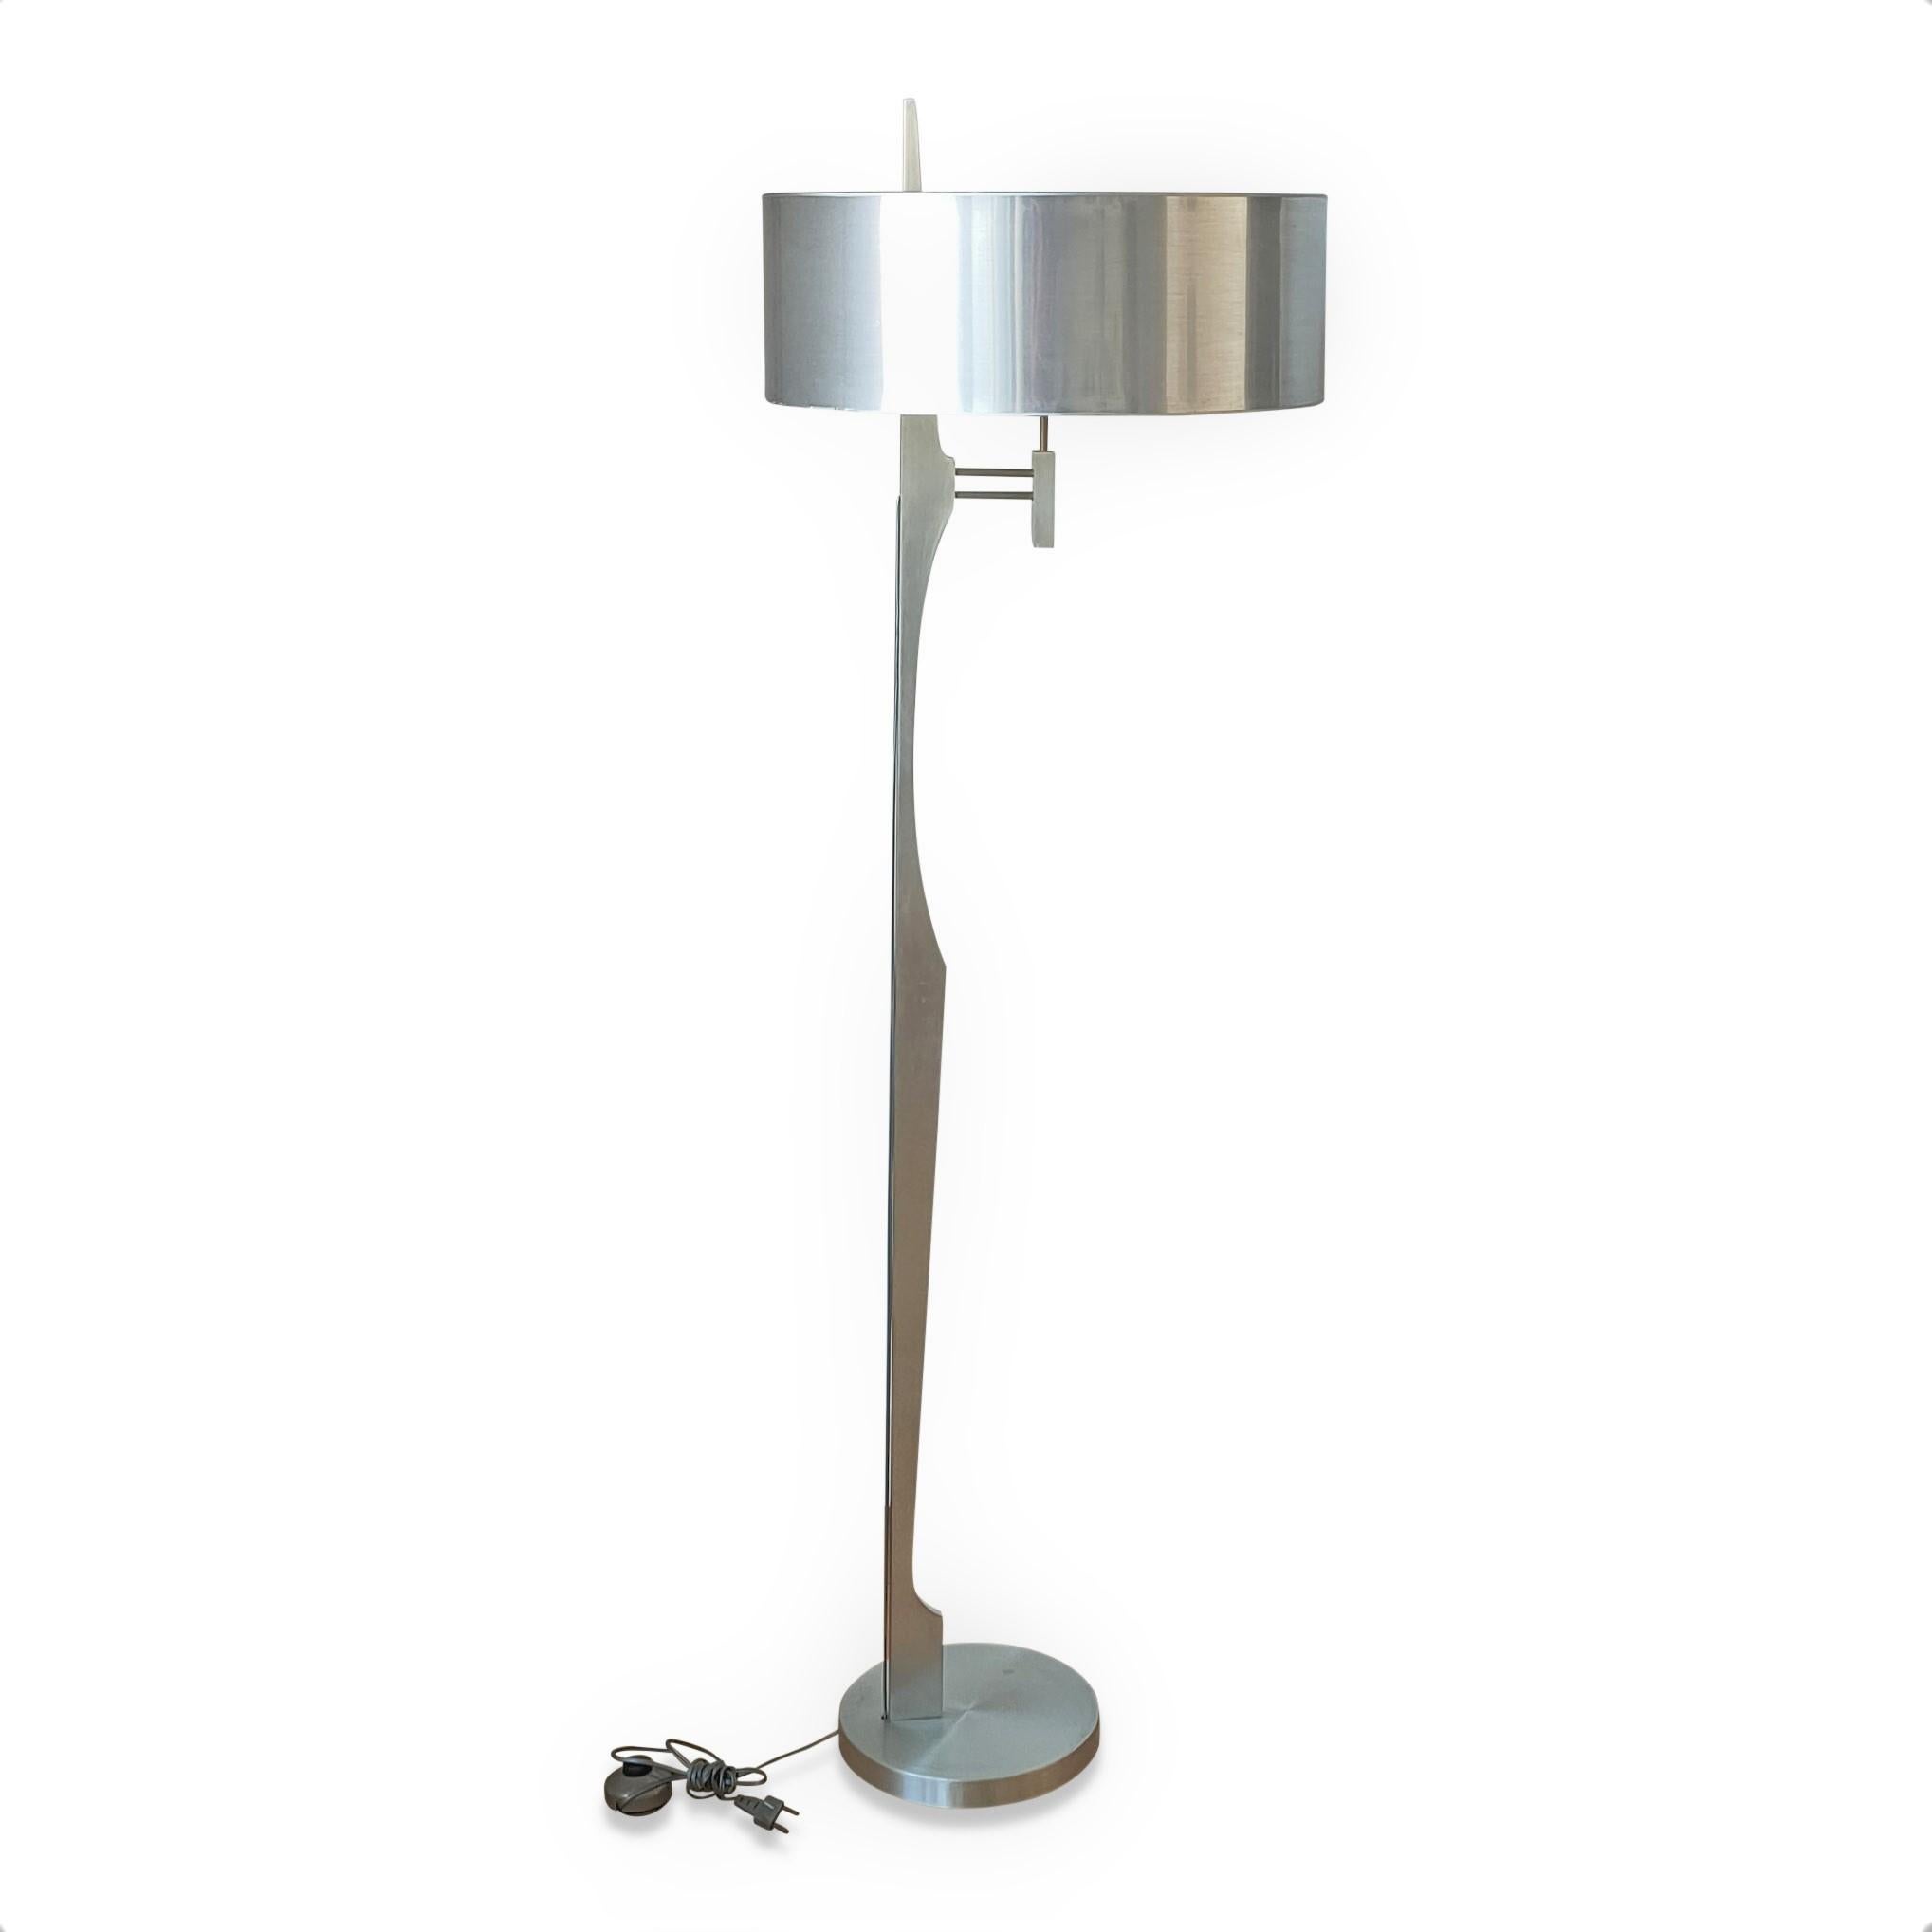 Forme libre modernist stainless steel lamp
European socket and wiring
good vintage condition
some scratches and dents on the surface of the base
this lamp will ship out of Paris
Price does not include shipping nor possible customs related